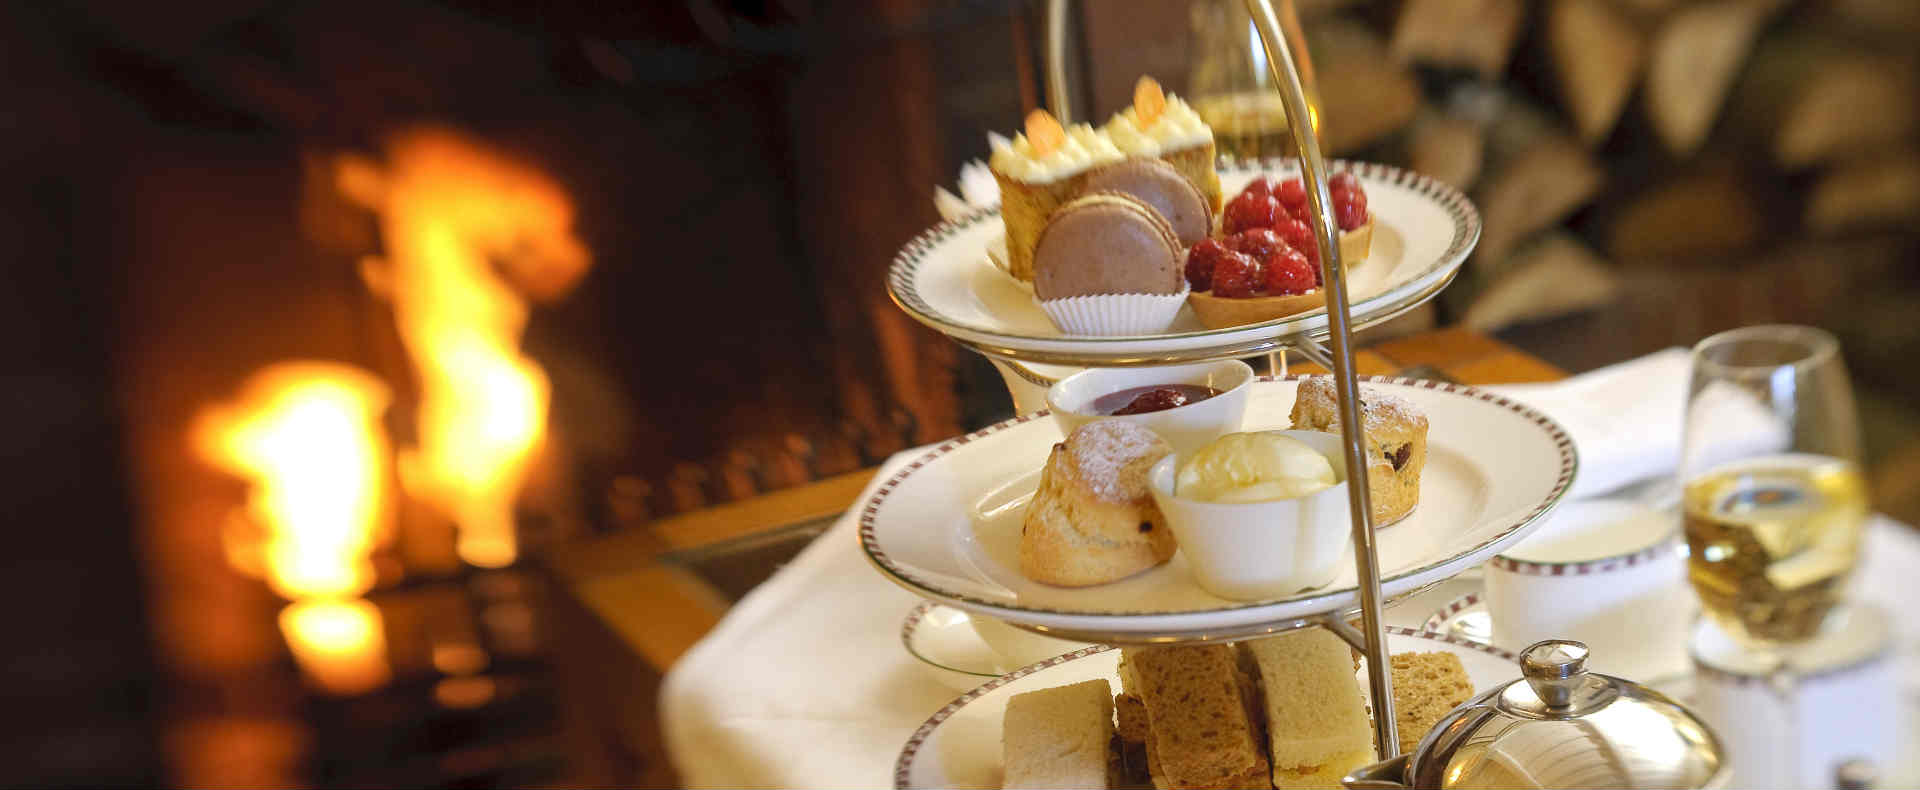 In Celebration Of National Tea Day | Montagu Arms1